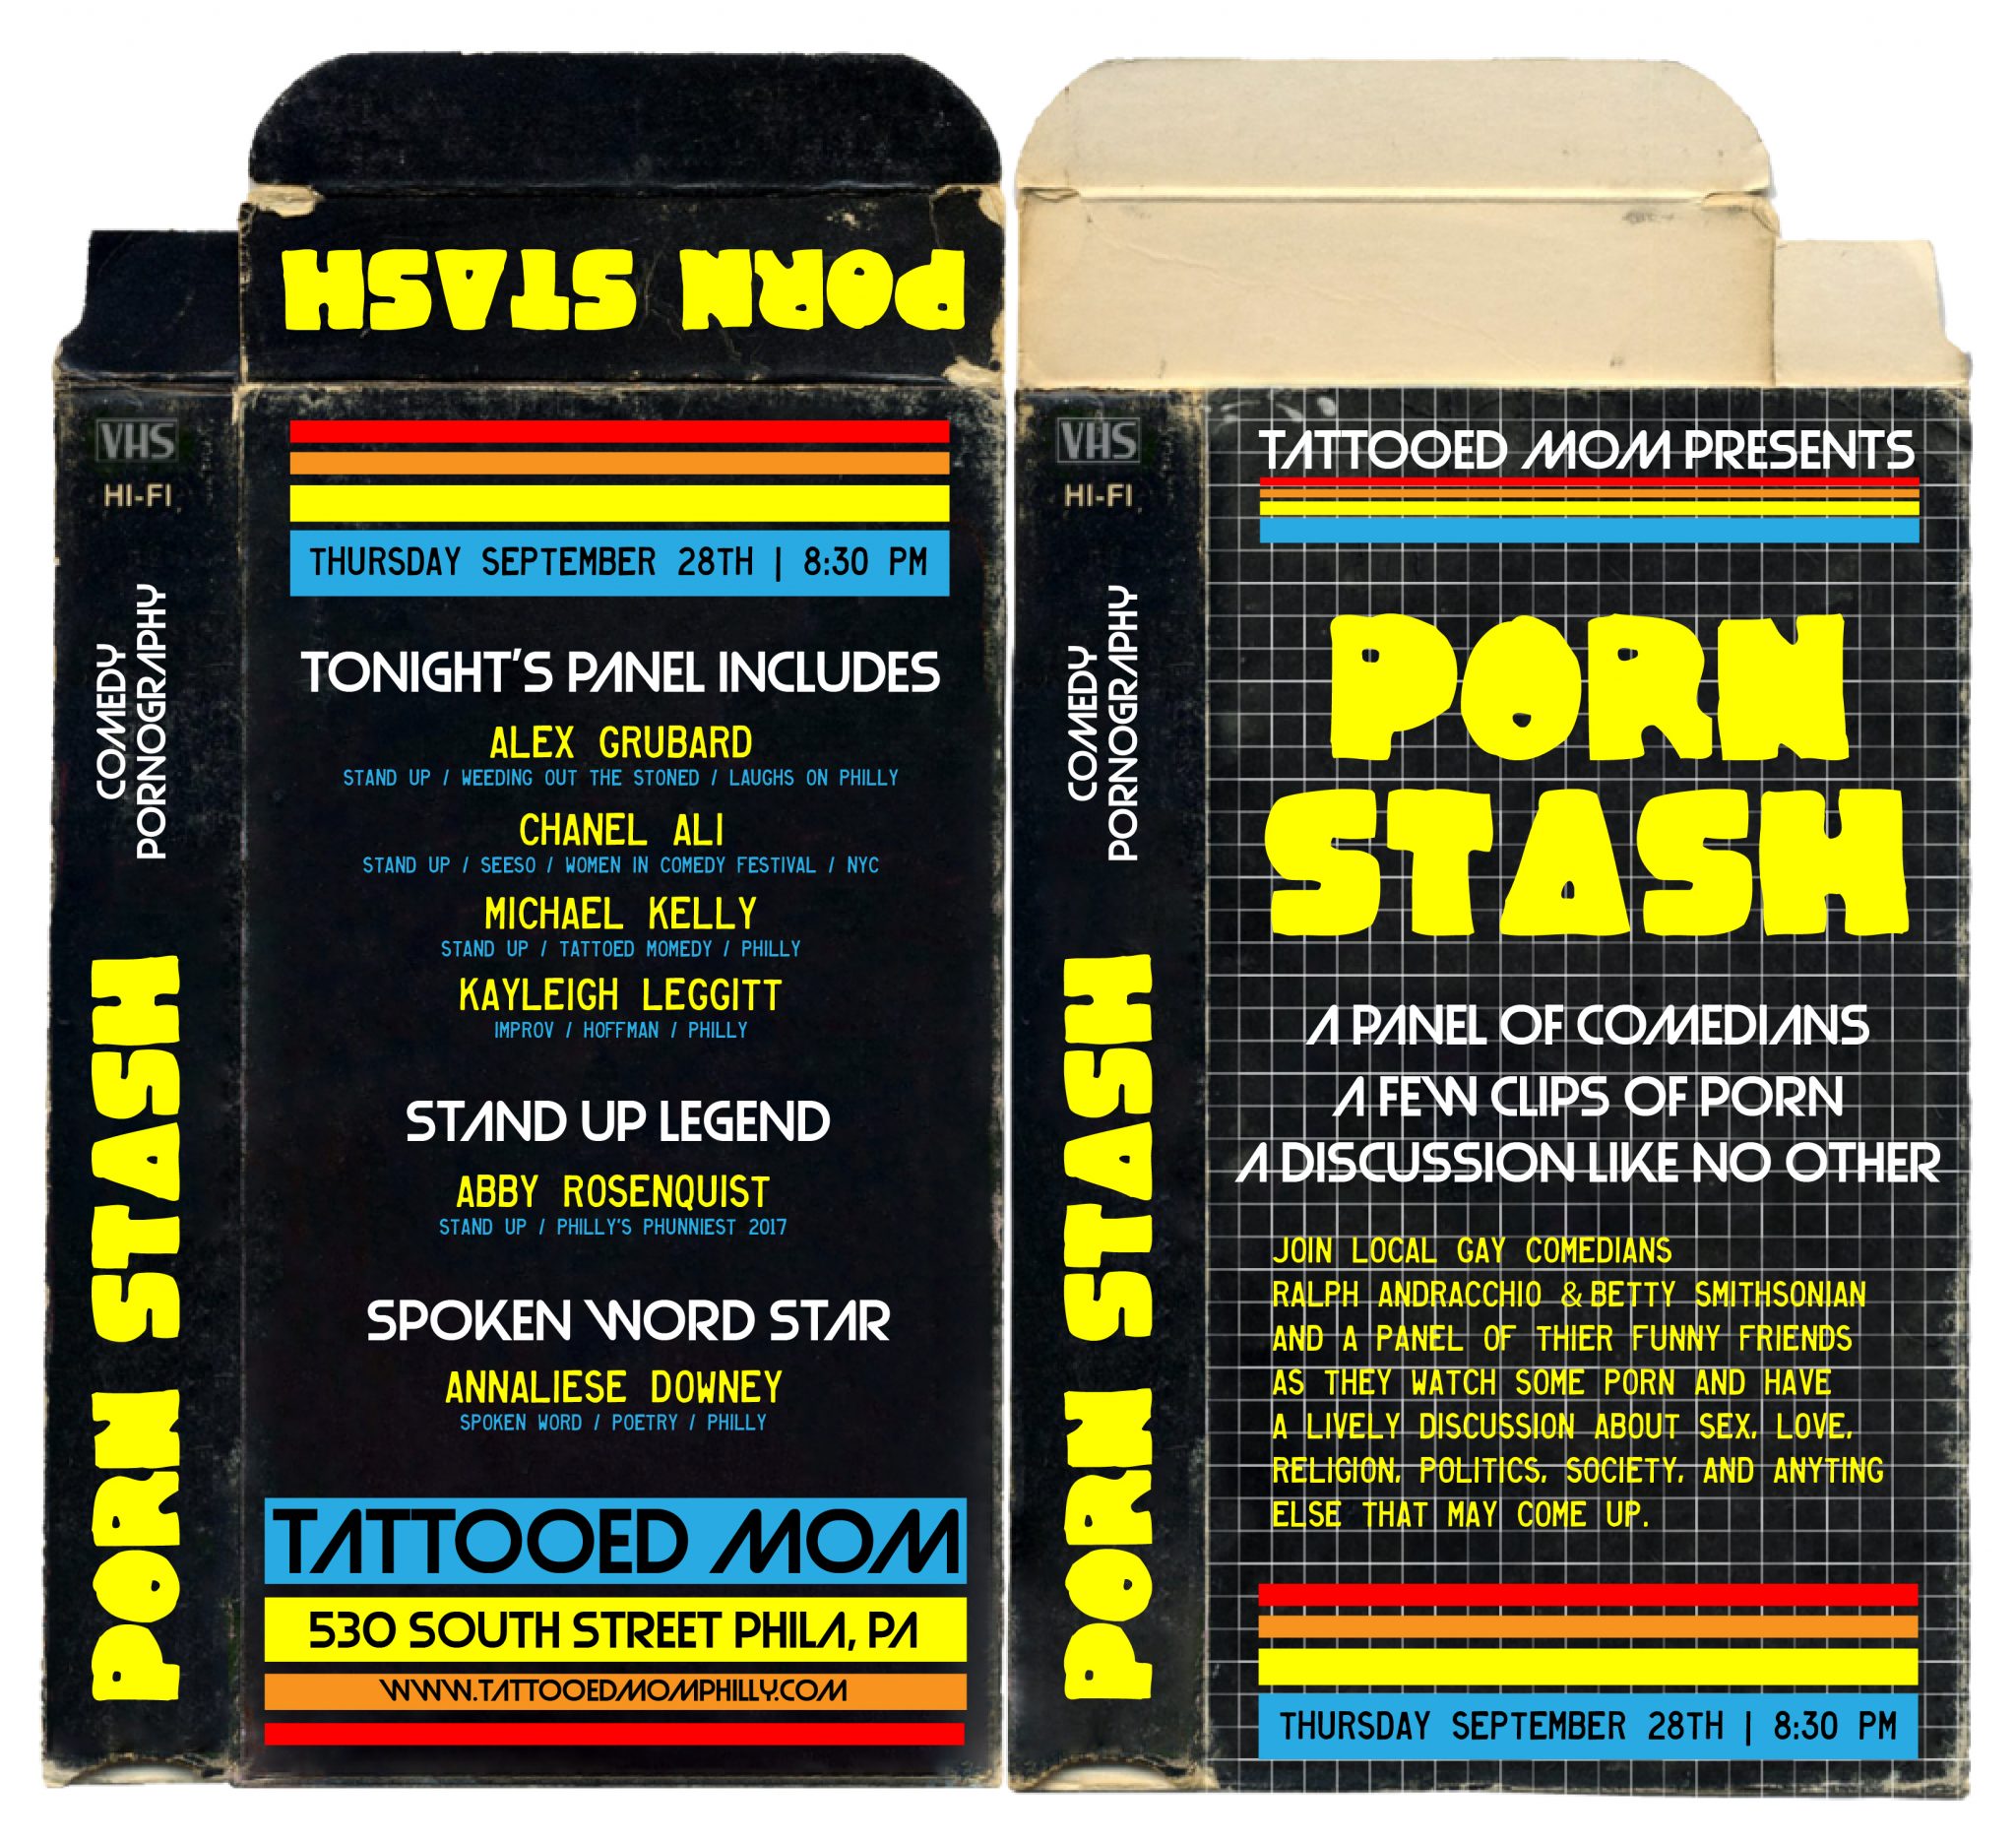 Betty & Ralph's Porn Stash: a comedy roundtable - Tattooed Mom